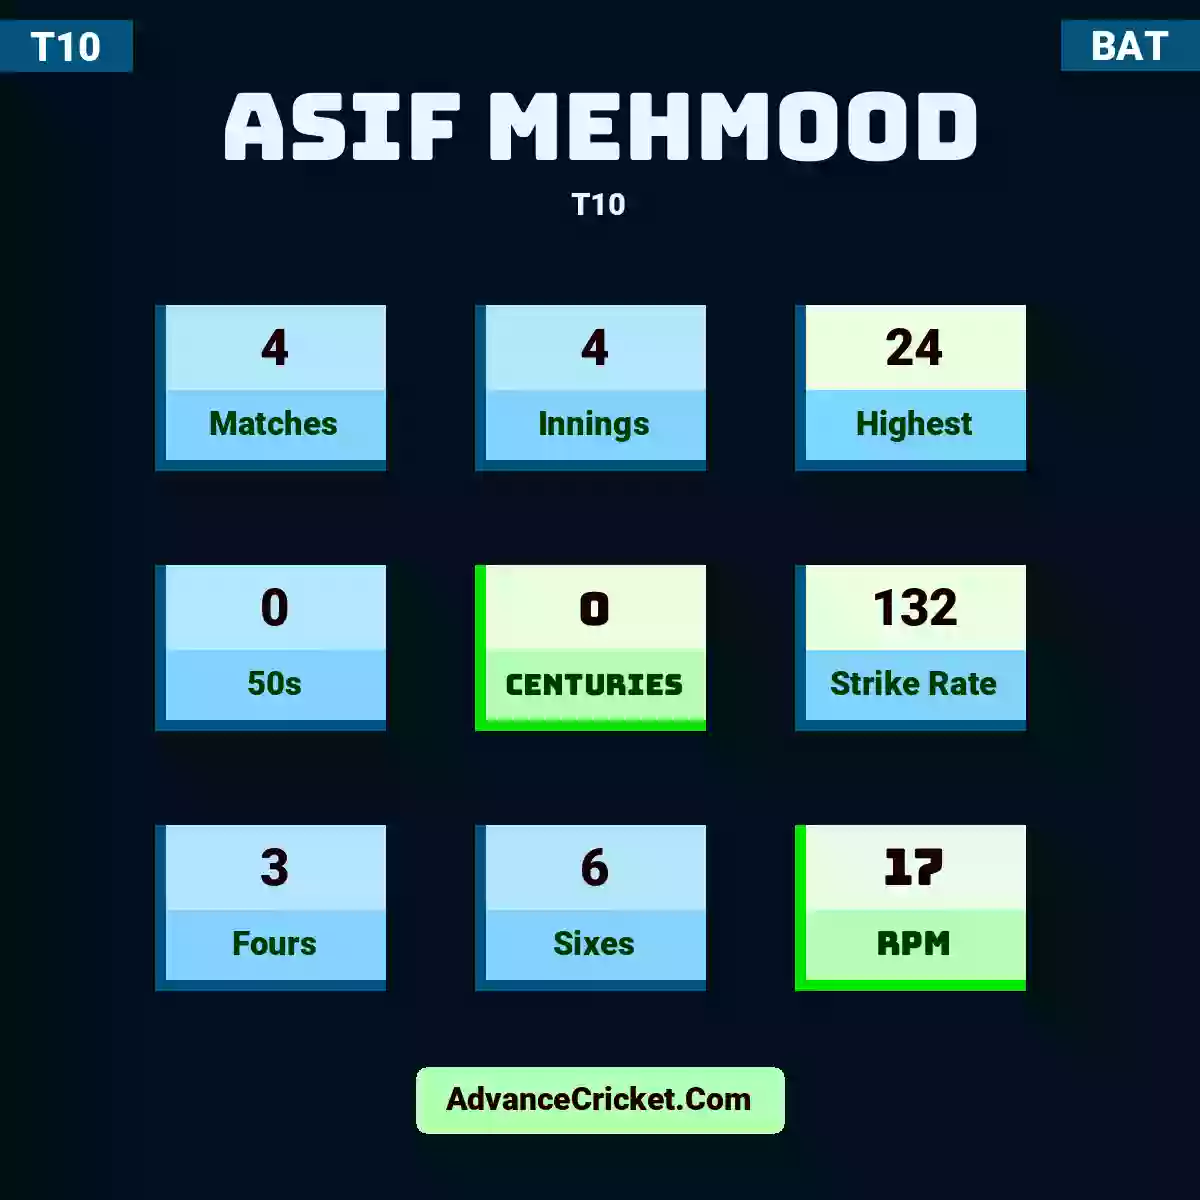 Asif Mehmood T10 , Asif Mehmood played 4 matches, scored 24 runs as highest, 0 half-centuries, and 0 centuries, with a strike rate of 132. A.Mehmood hit 3 fours and 6 sixes, with an RPM of 17.